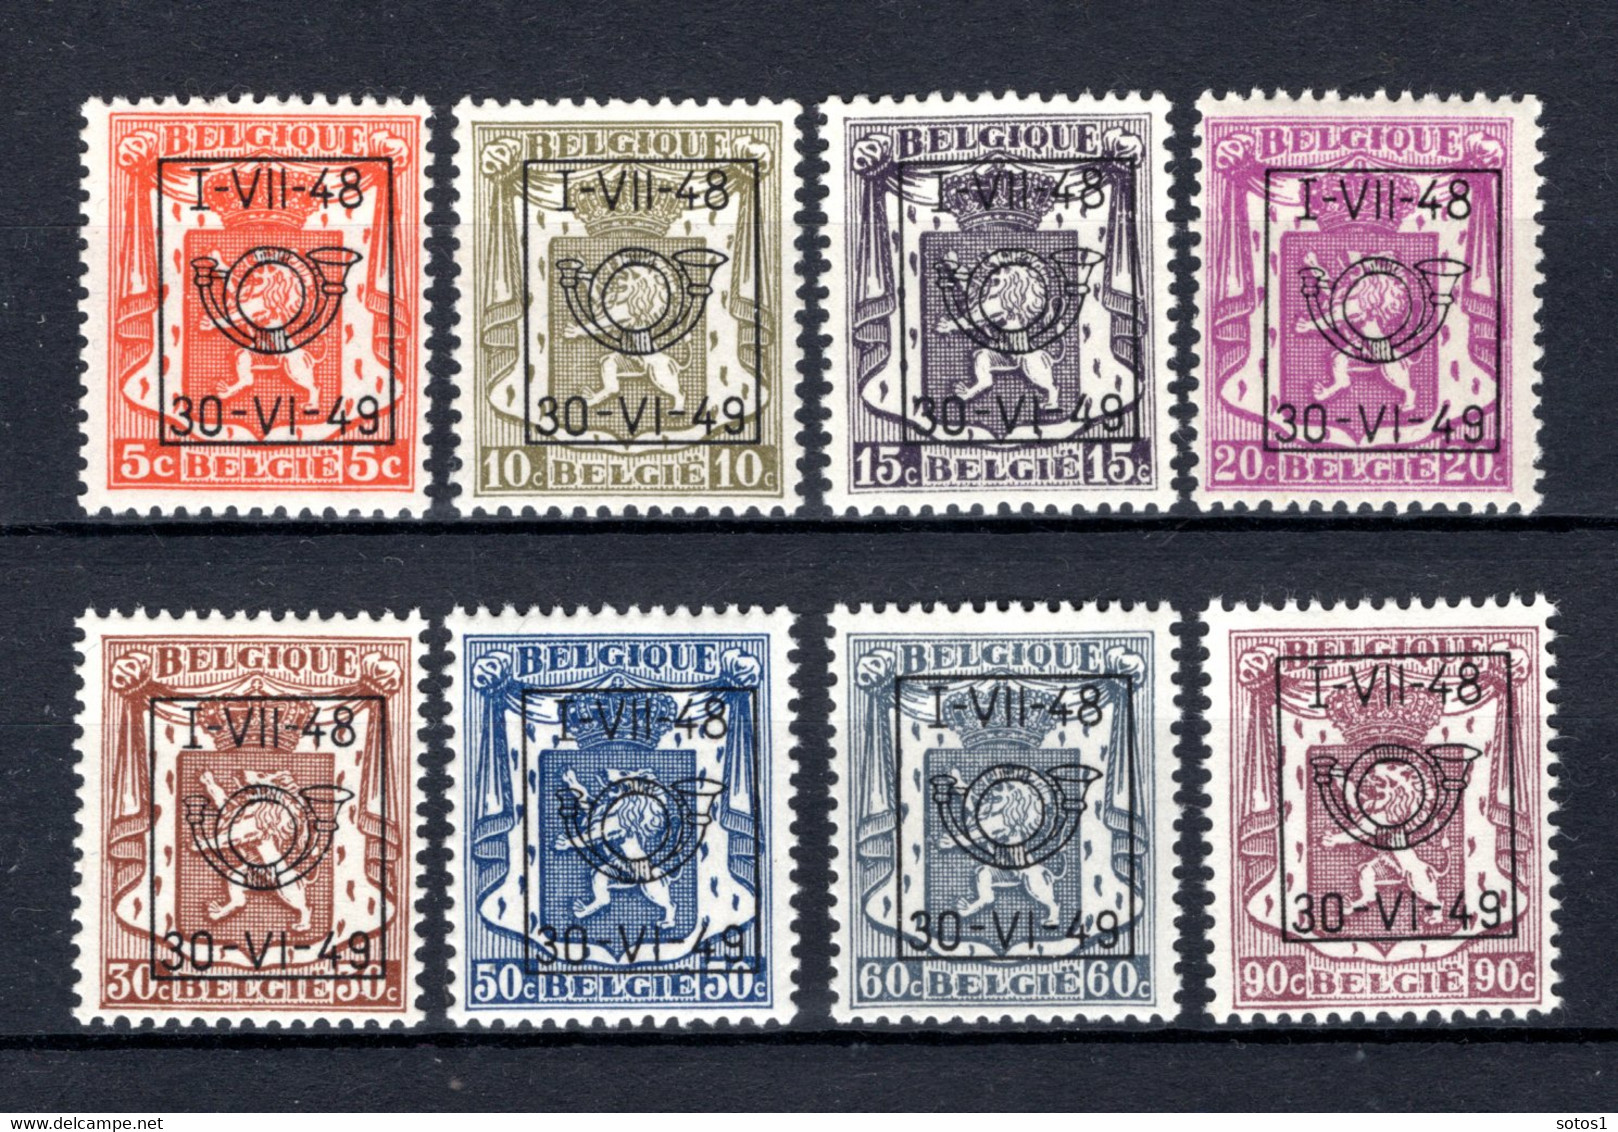 PRE581/588 MNH 1946 - Klein Staatswapen Opdruk Type D - REEKS 35 - Typo Precancels 1936-51 (Small Seal Of The State)